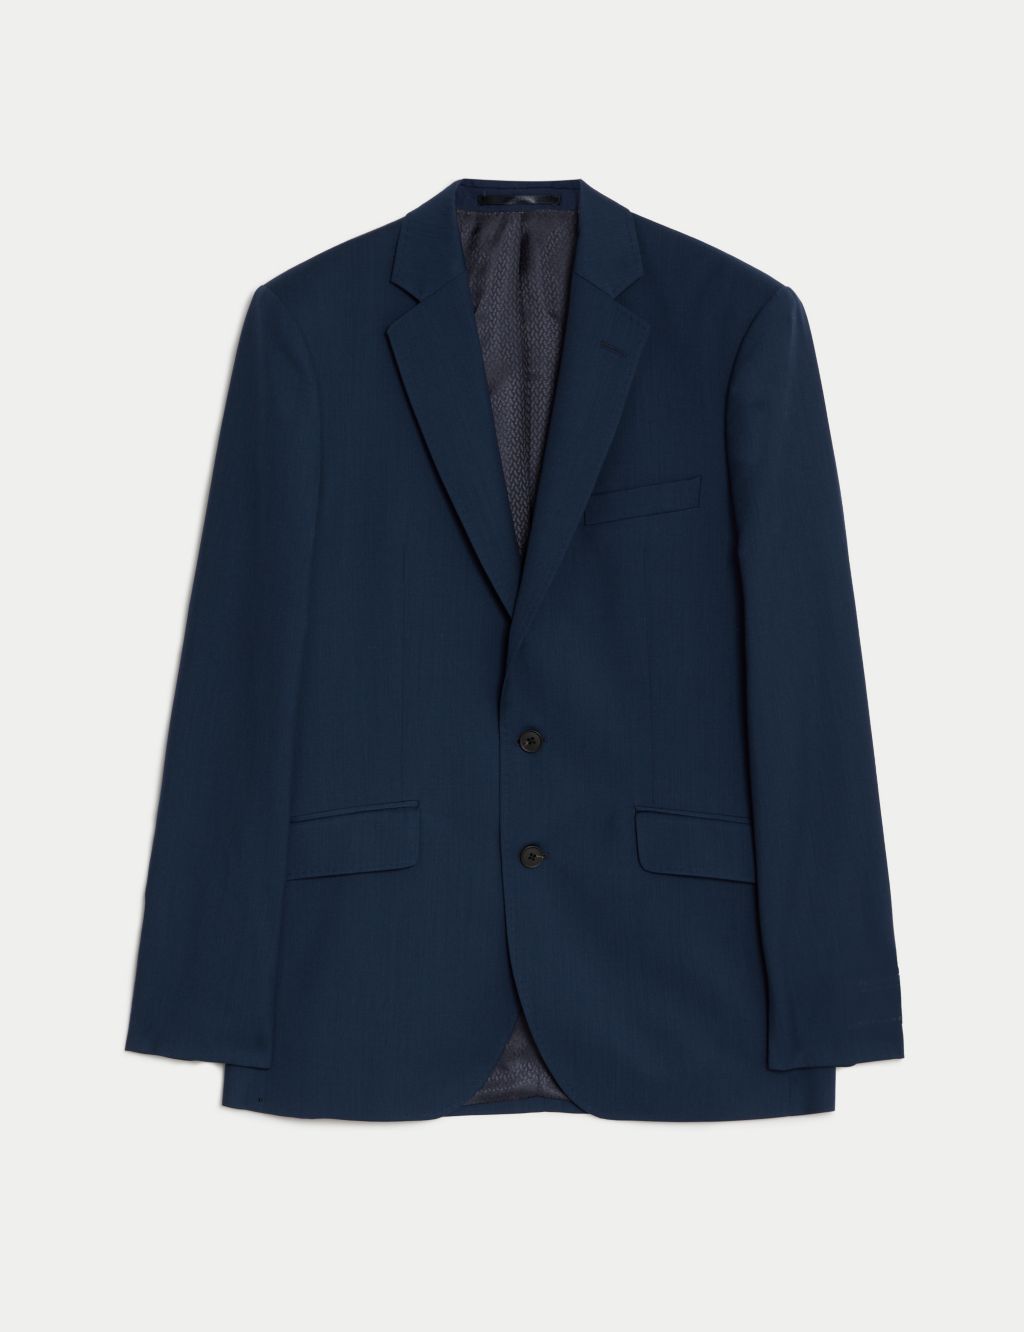 Tailored Fit Pure Wool Twill Jacket image 1